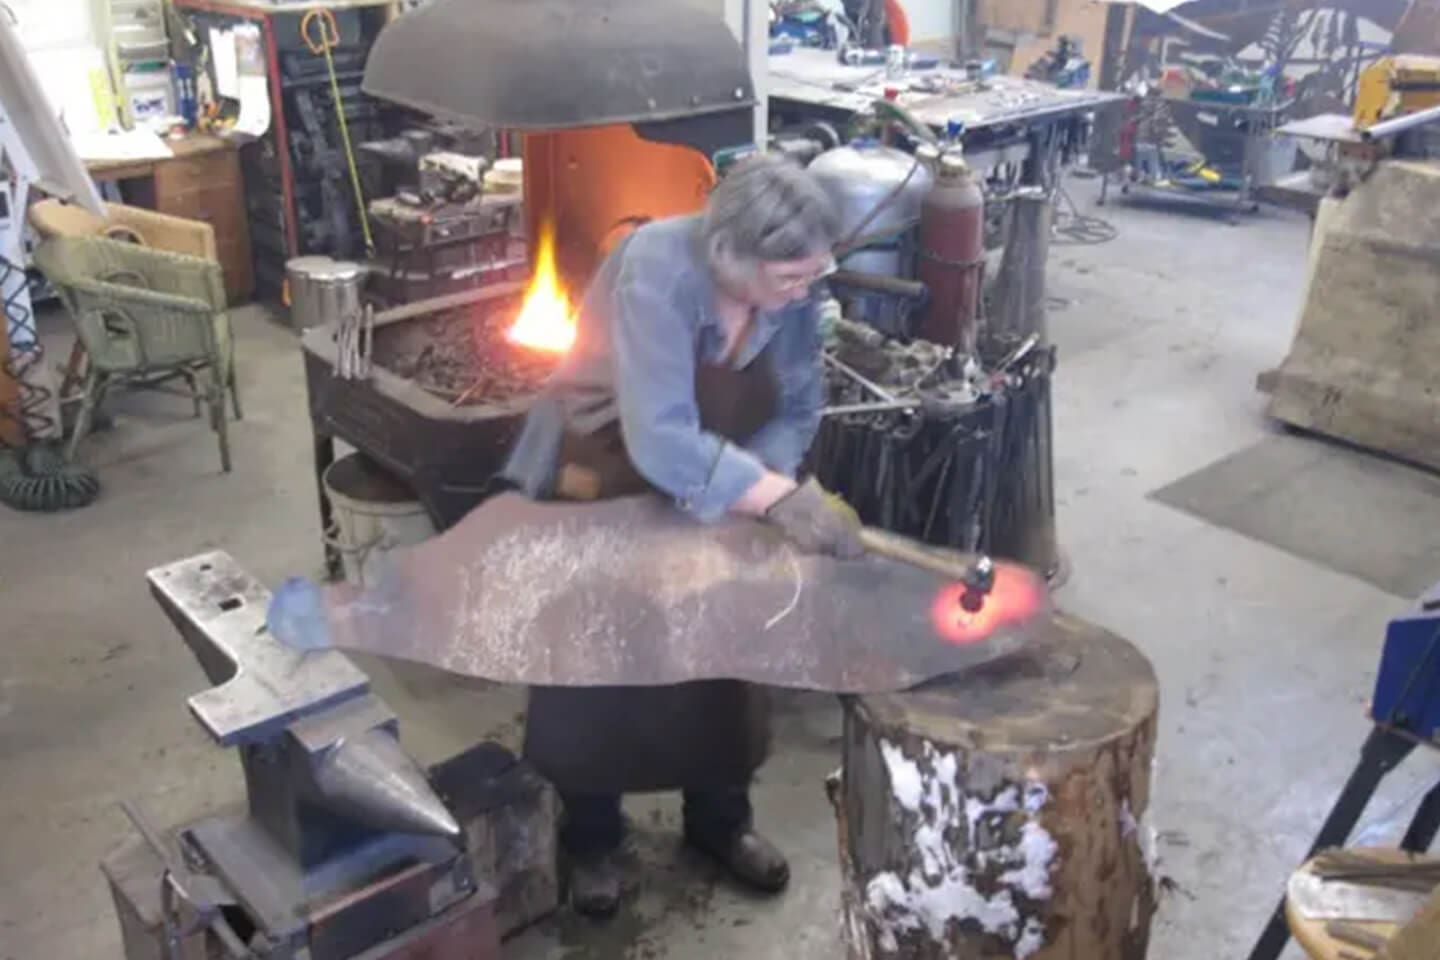 A man is working on an iron object.